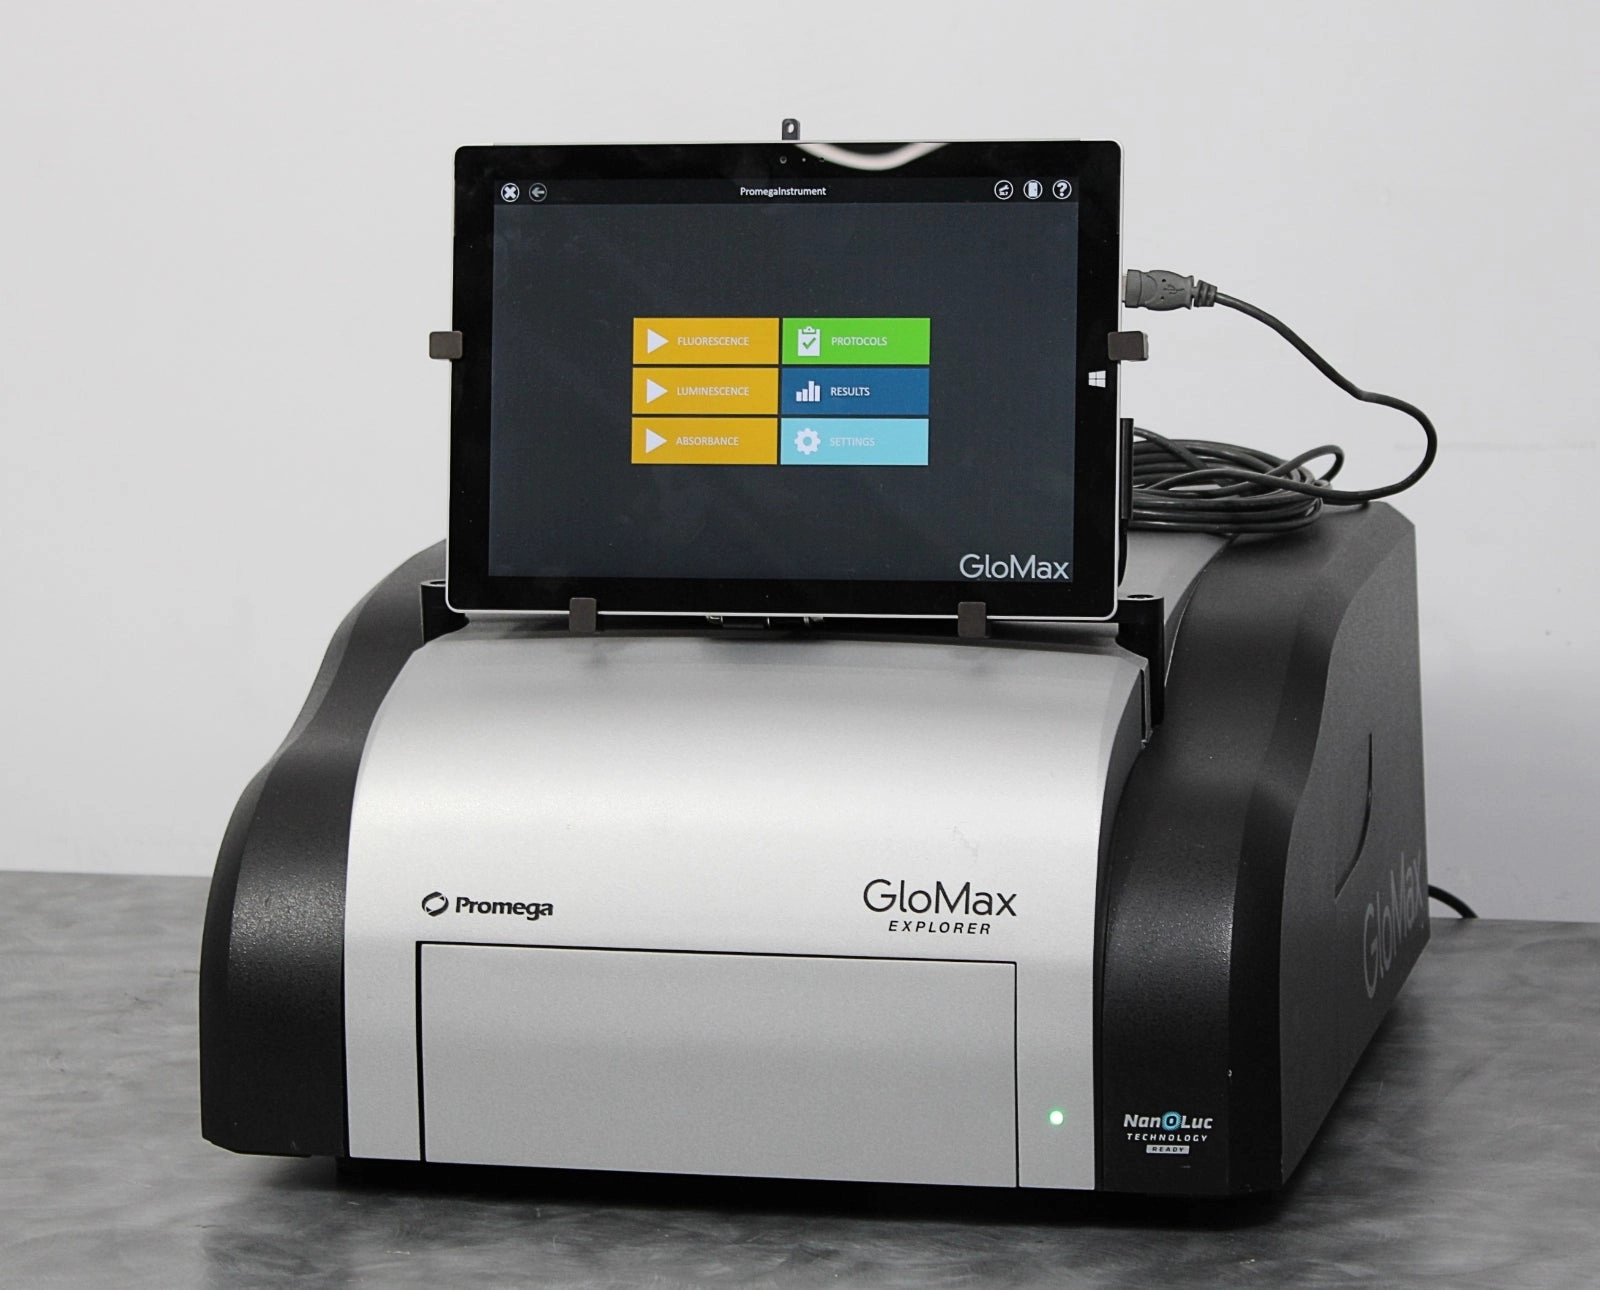 Promega GloMax Explorer GM3500 Multimode Microplate Reader with Tablet PC